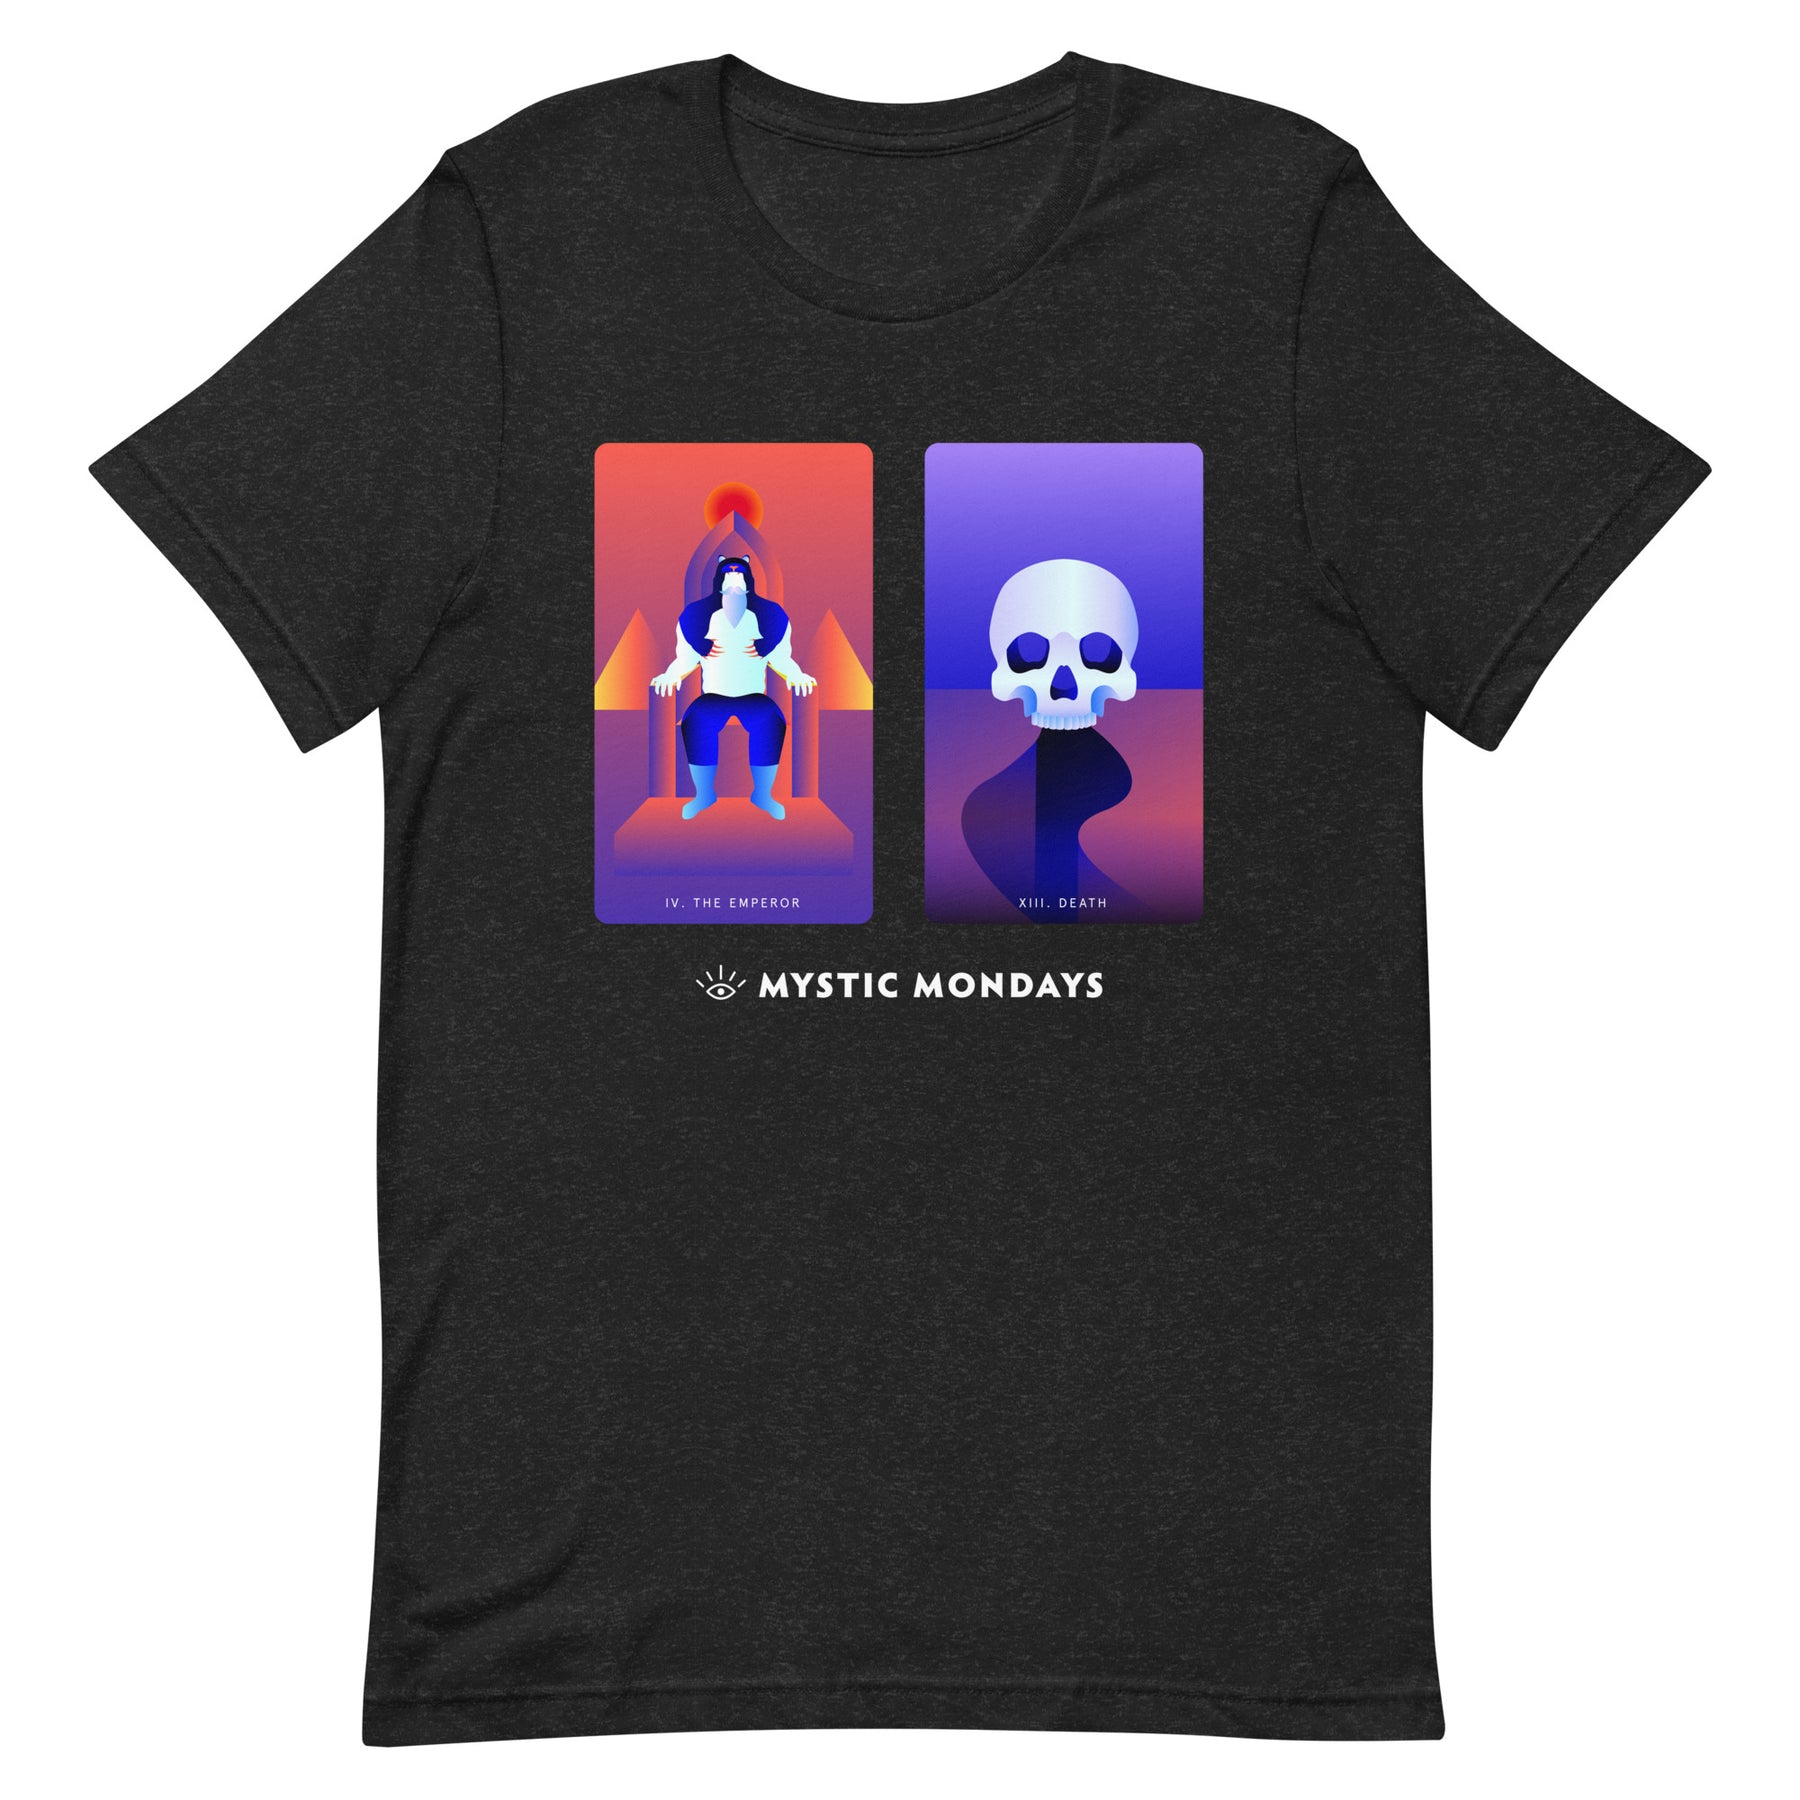 The Emperor and Death T-shirt